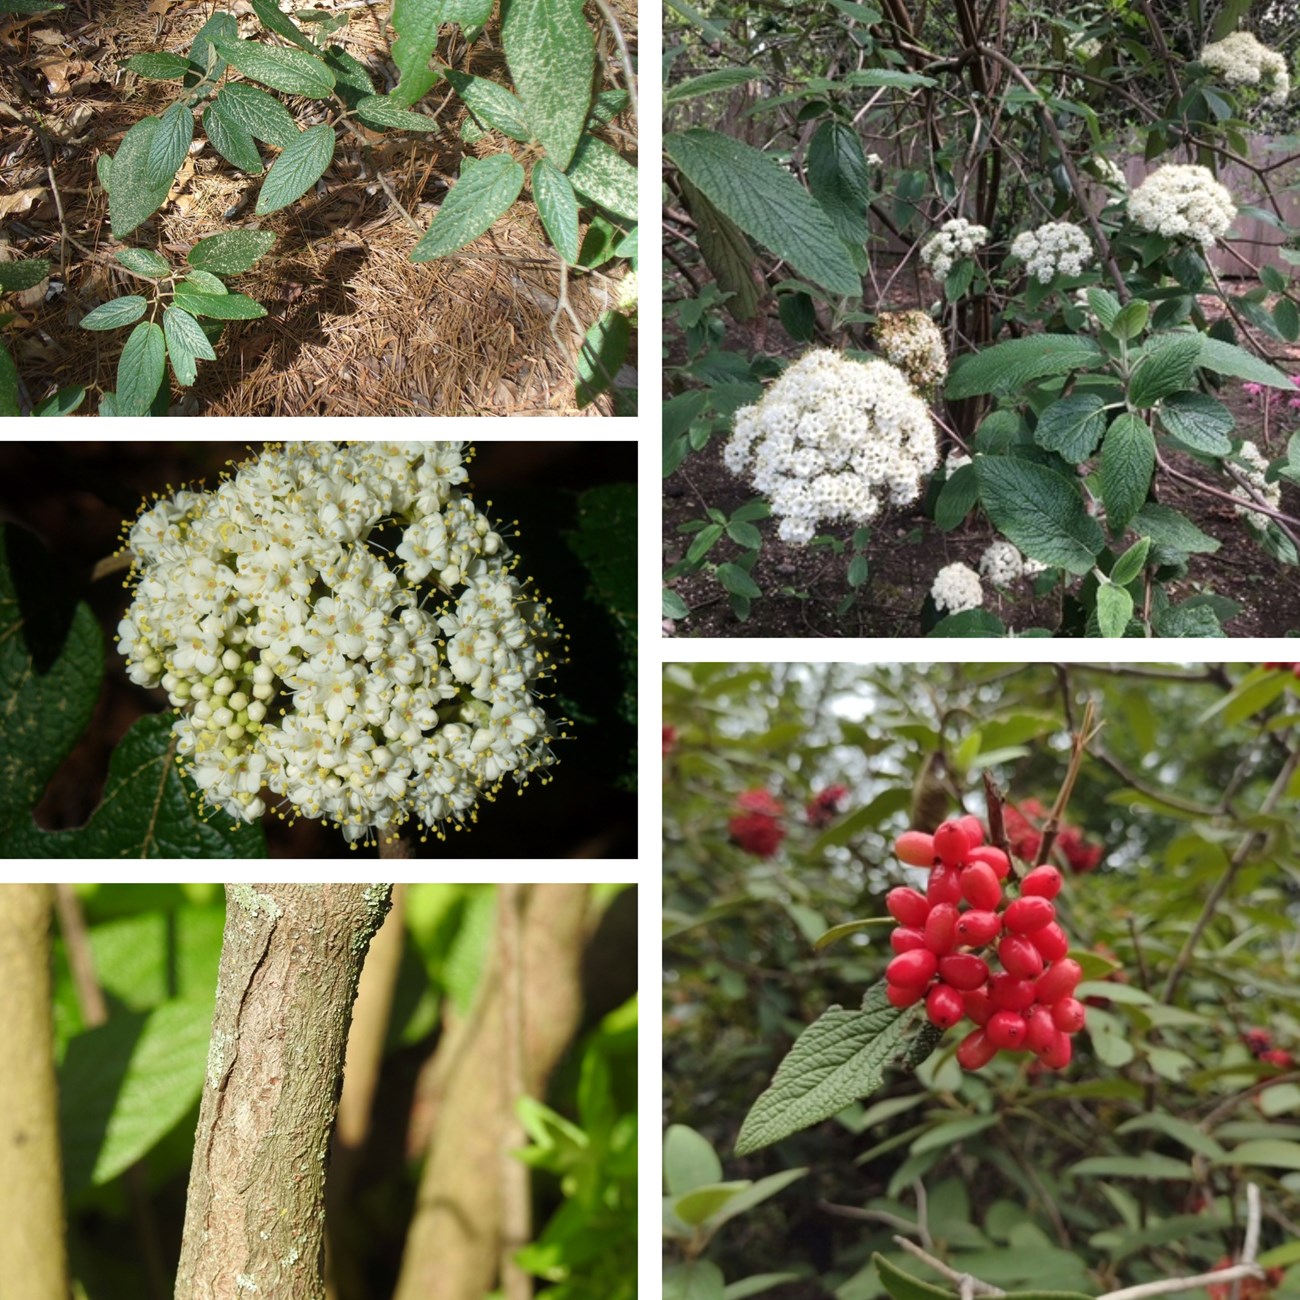 Collage of viburnum rhytidophilloides including photos of flowers, berries, bark, leaves, and entire plant